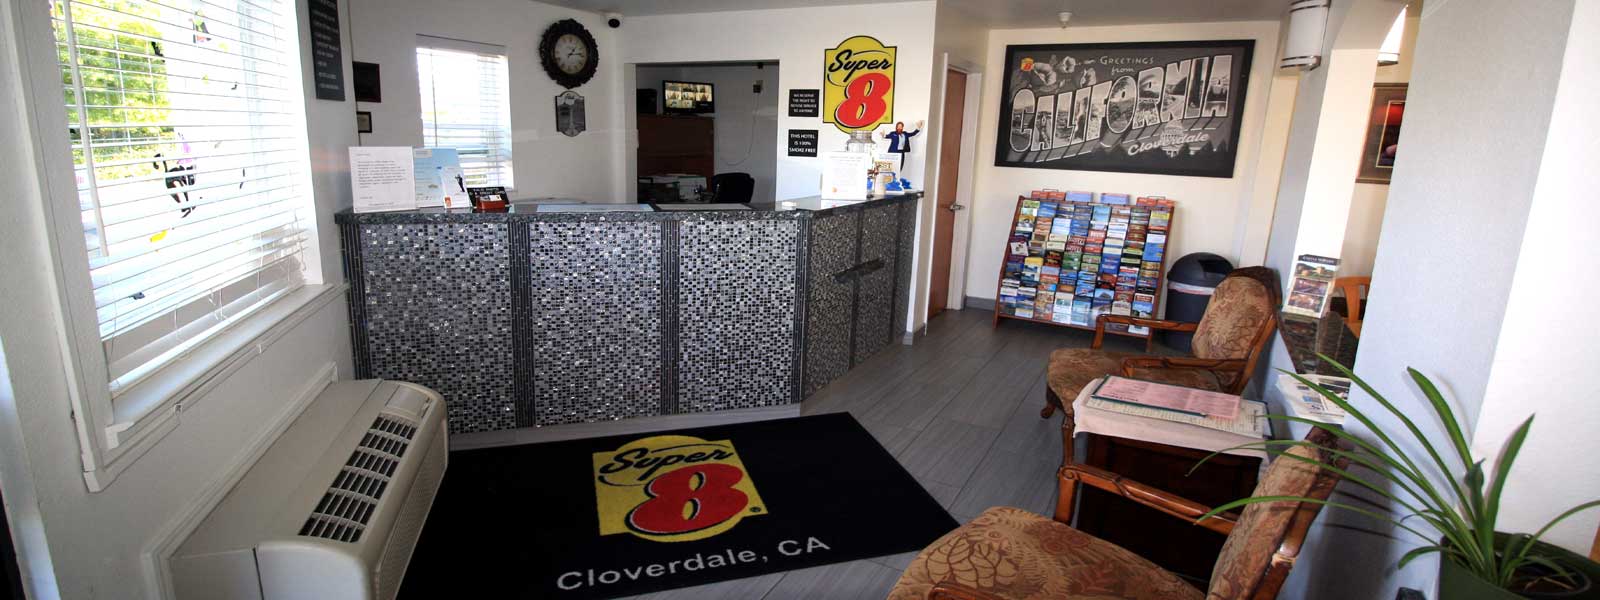 Discount Budget Cheap Affordable Hotels Motels Super 8 Wine Country Sonoma